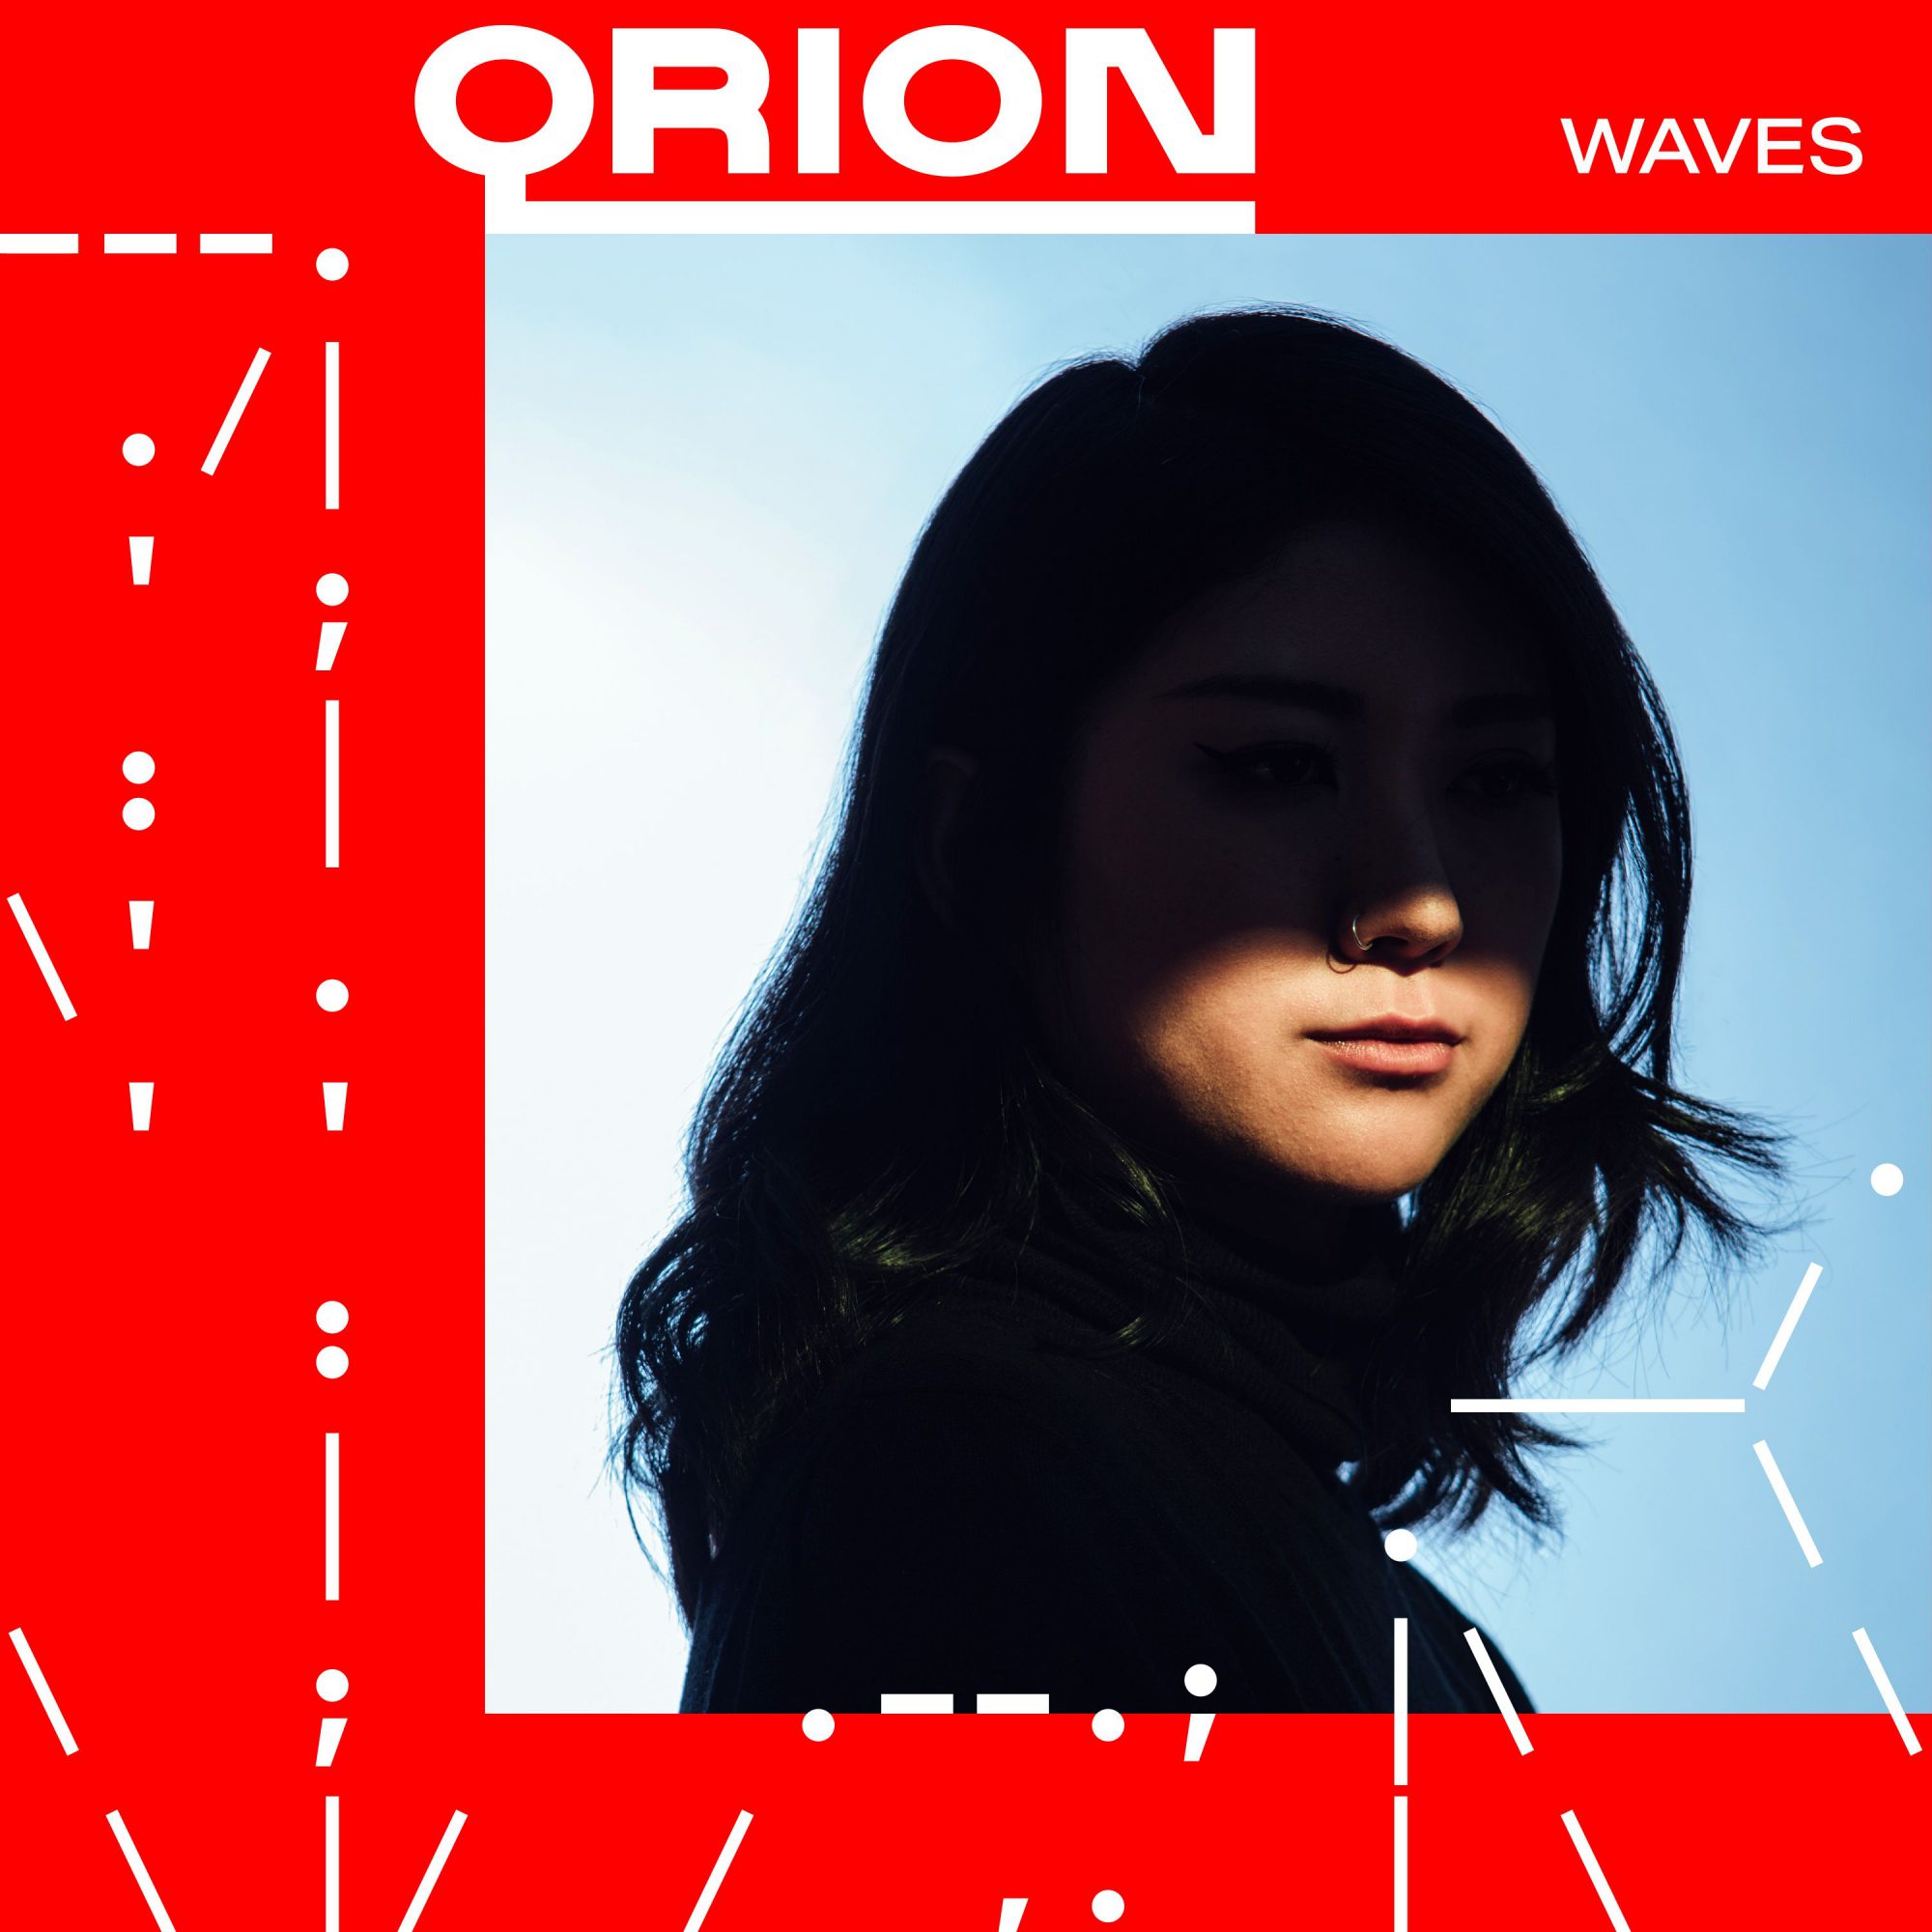 Qrion Waves EP